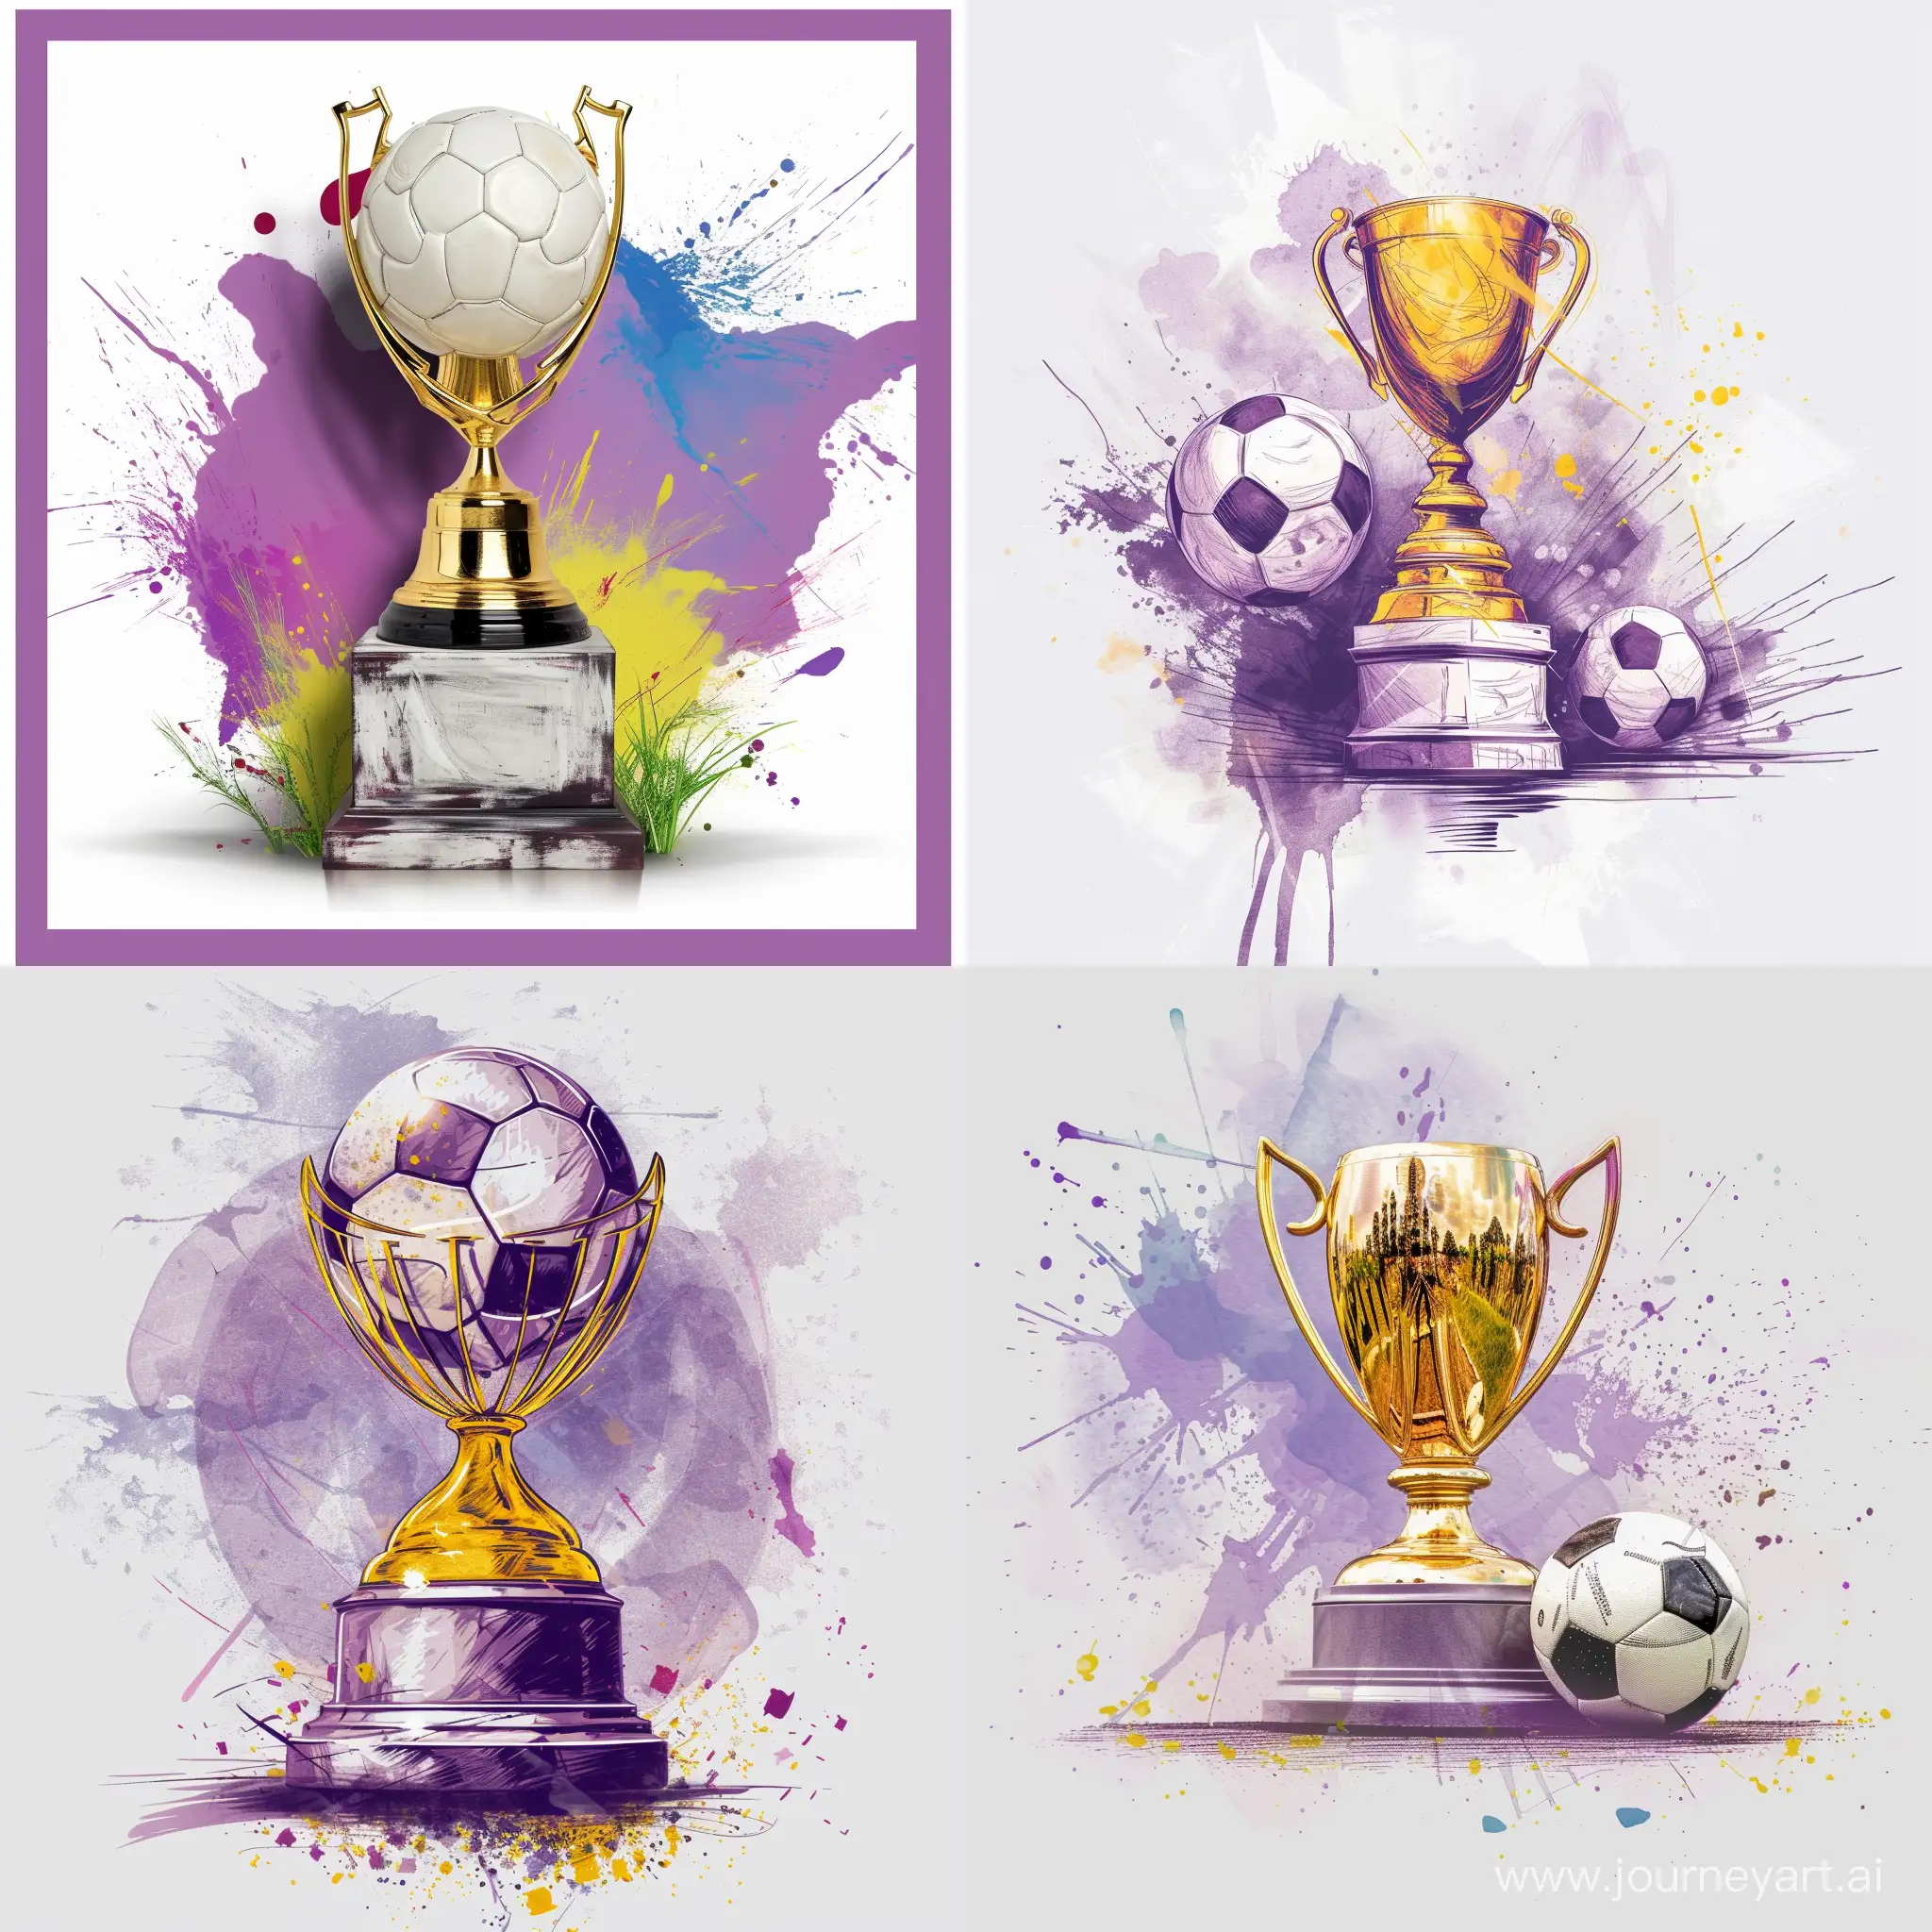 Victorious-Football-Team-Celebrates-with-Gold-Trophy-in-Elegant-Purple-and-White-Setting